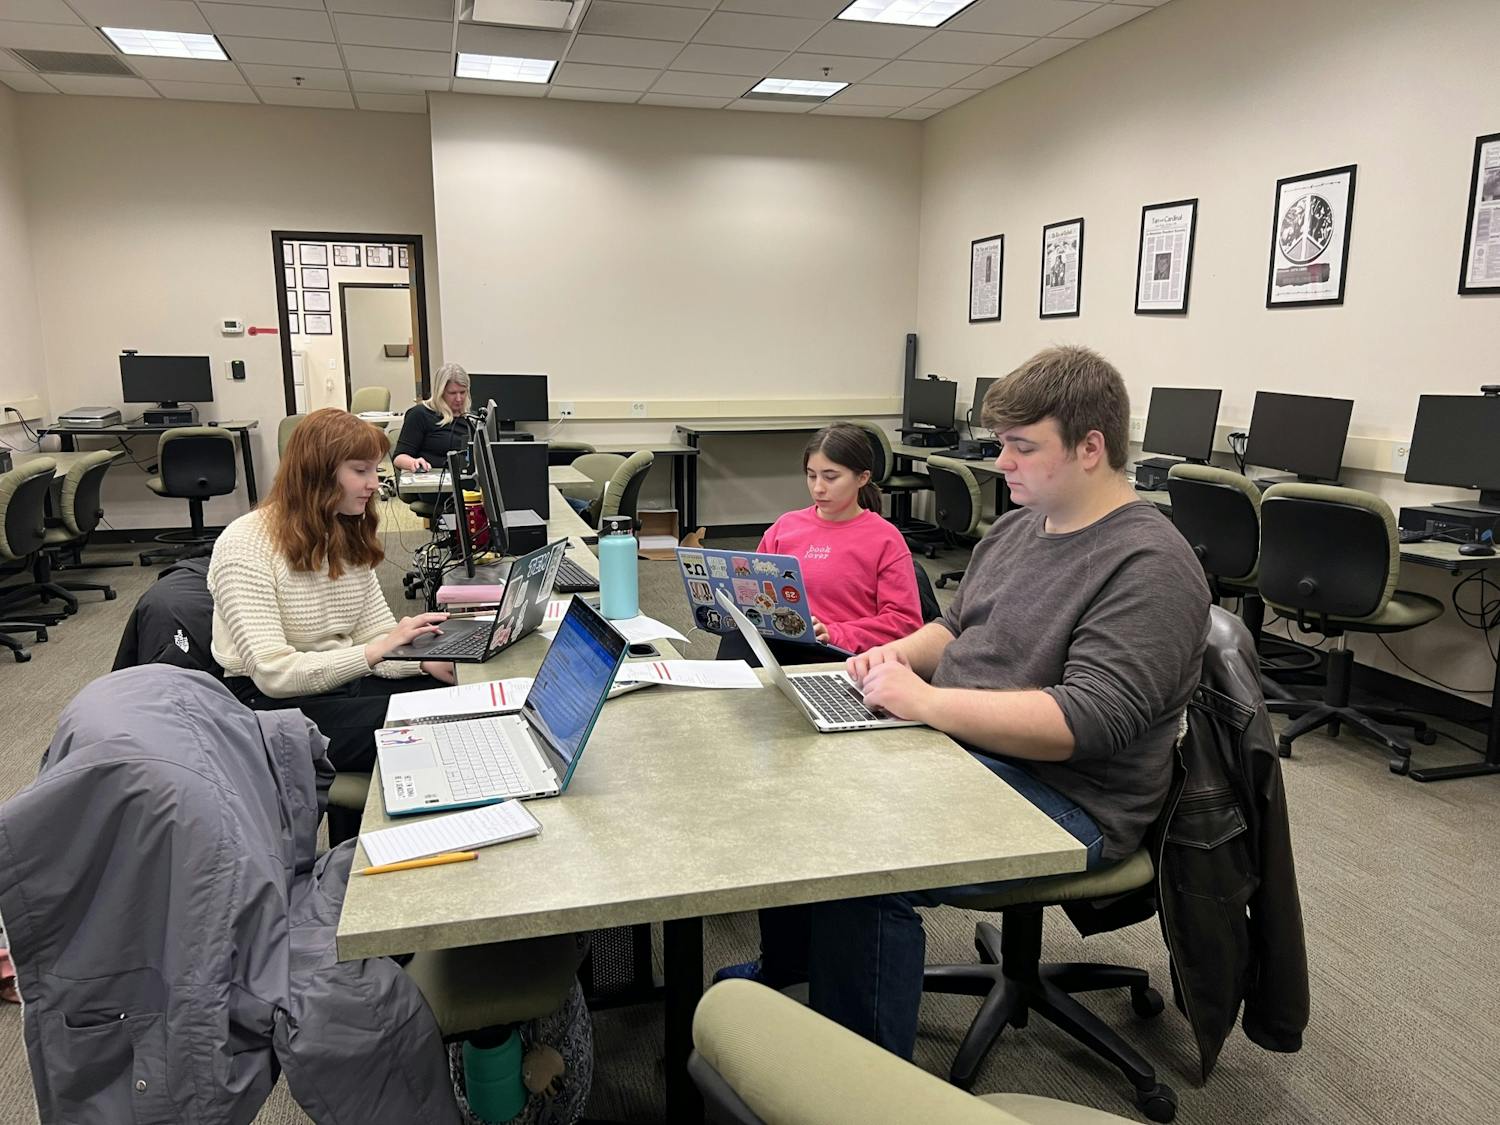 T&amp;C staff members work on their laptops in the T&amp;C computer lab. Staff pictured are Promotions Manager Sophia Imundo, Staff Adviser Dr. Hillary Warren, Opinion Reporter Abby Vitali, and Copy Supervisor Hayden Garrett.